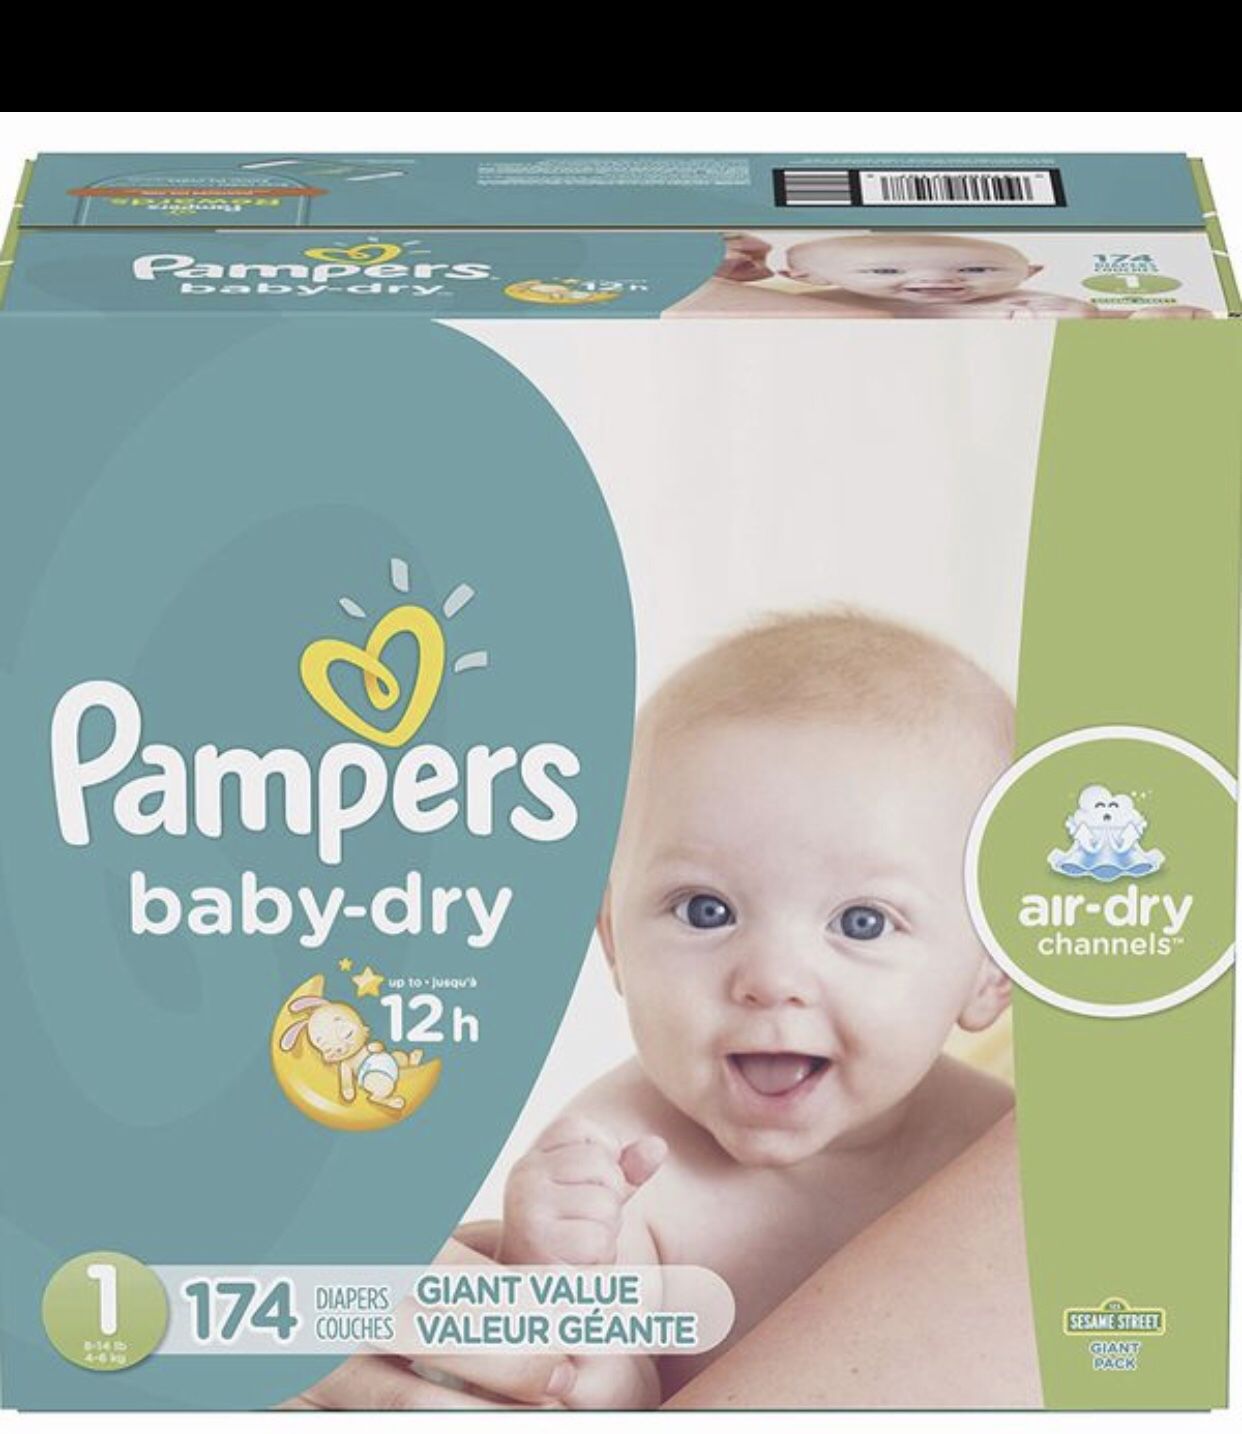 Pampers Size 1 Diapers 174ct